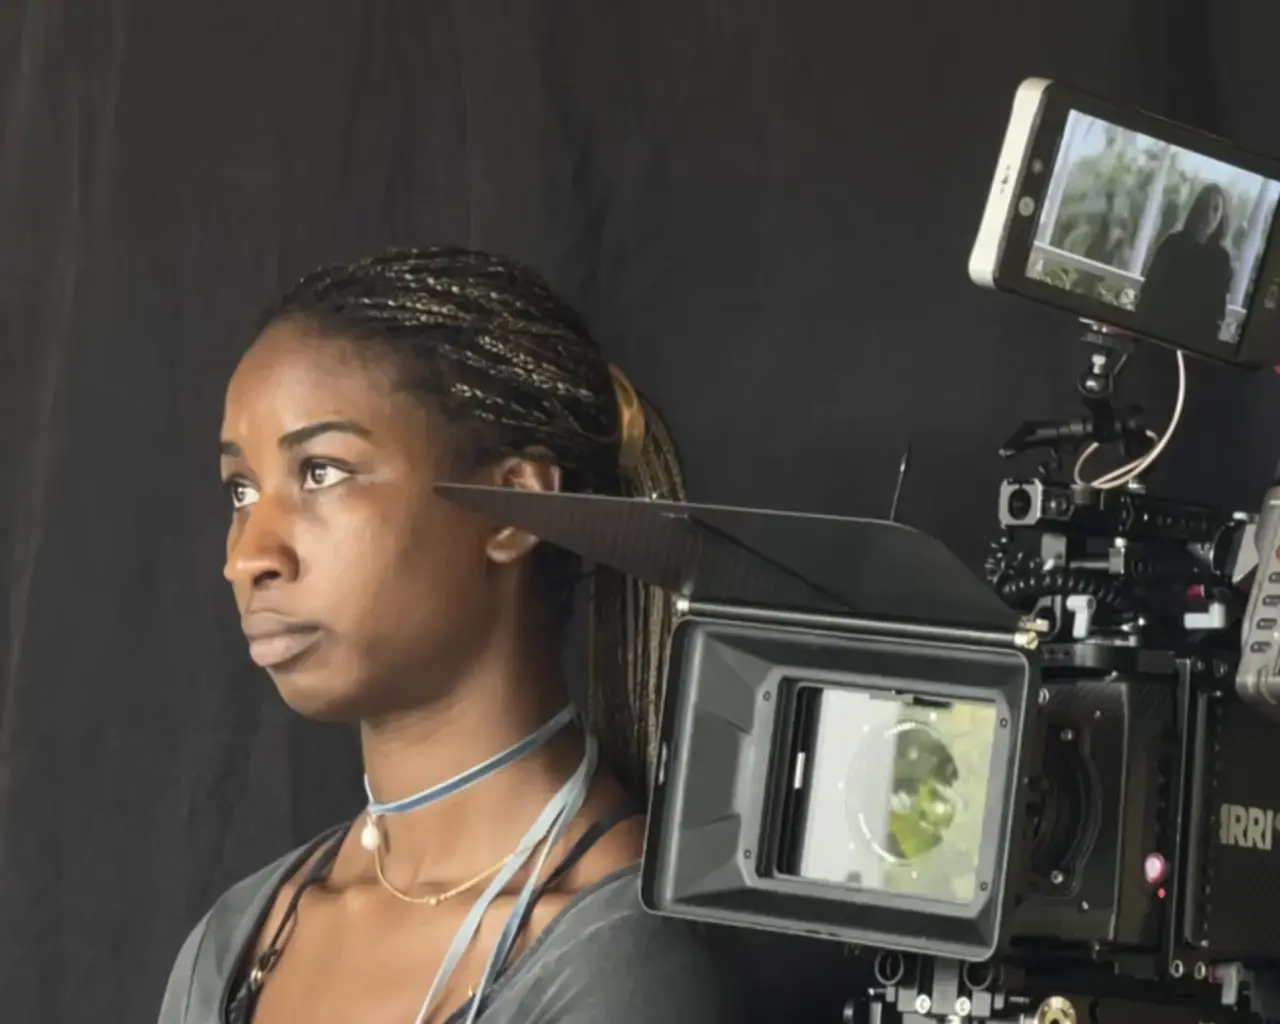 Pew Fellow Sabaah Folayan on the set of her documentary Look at Me: XXXTentacion.